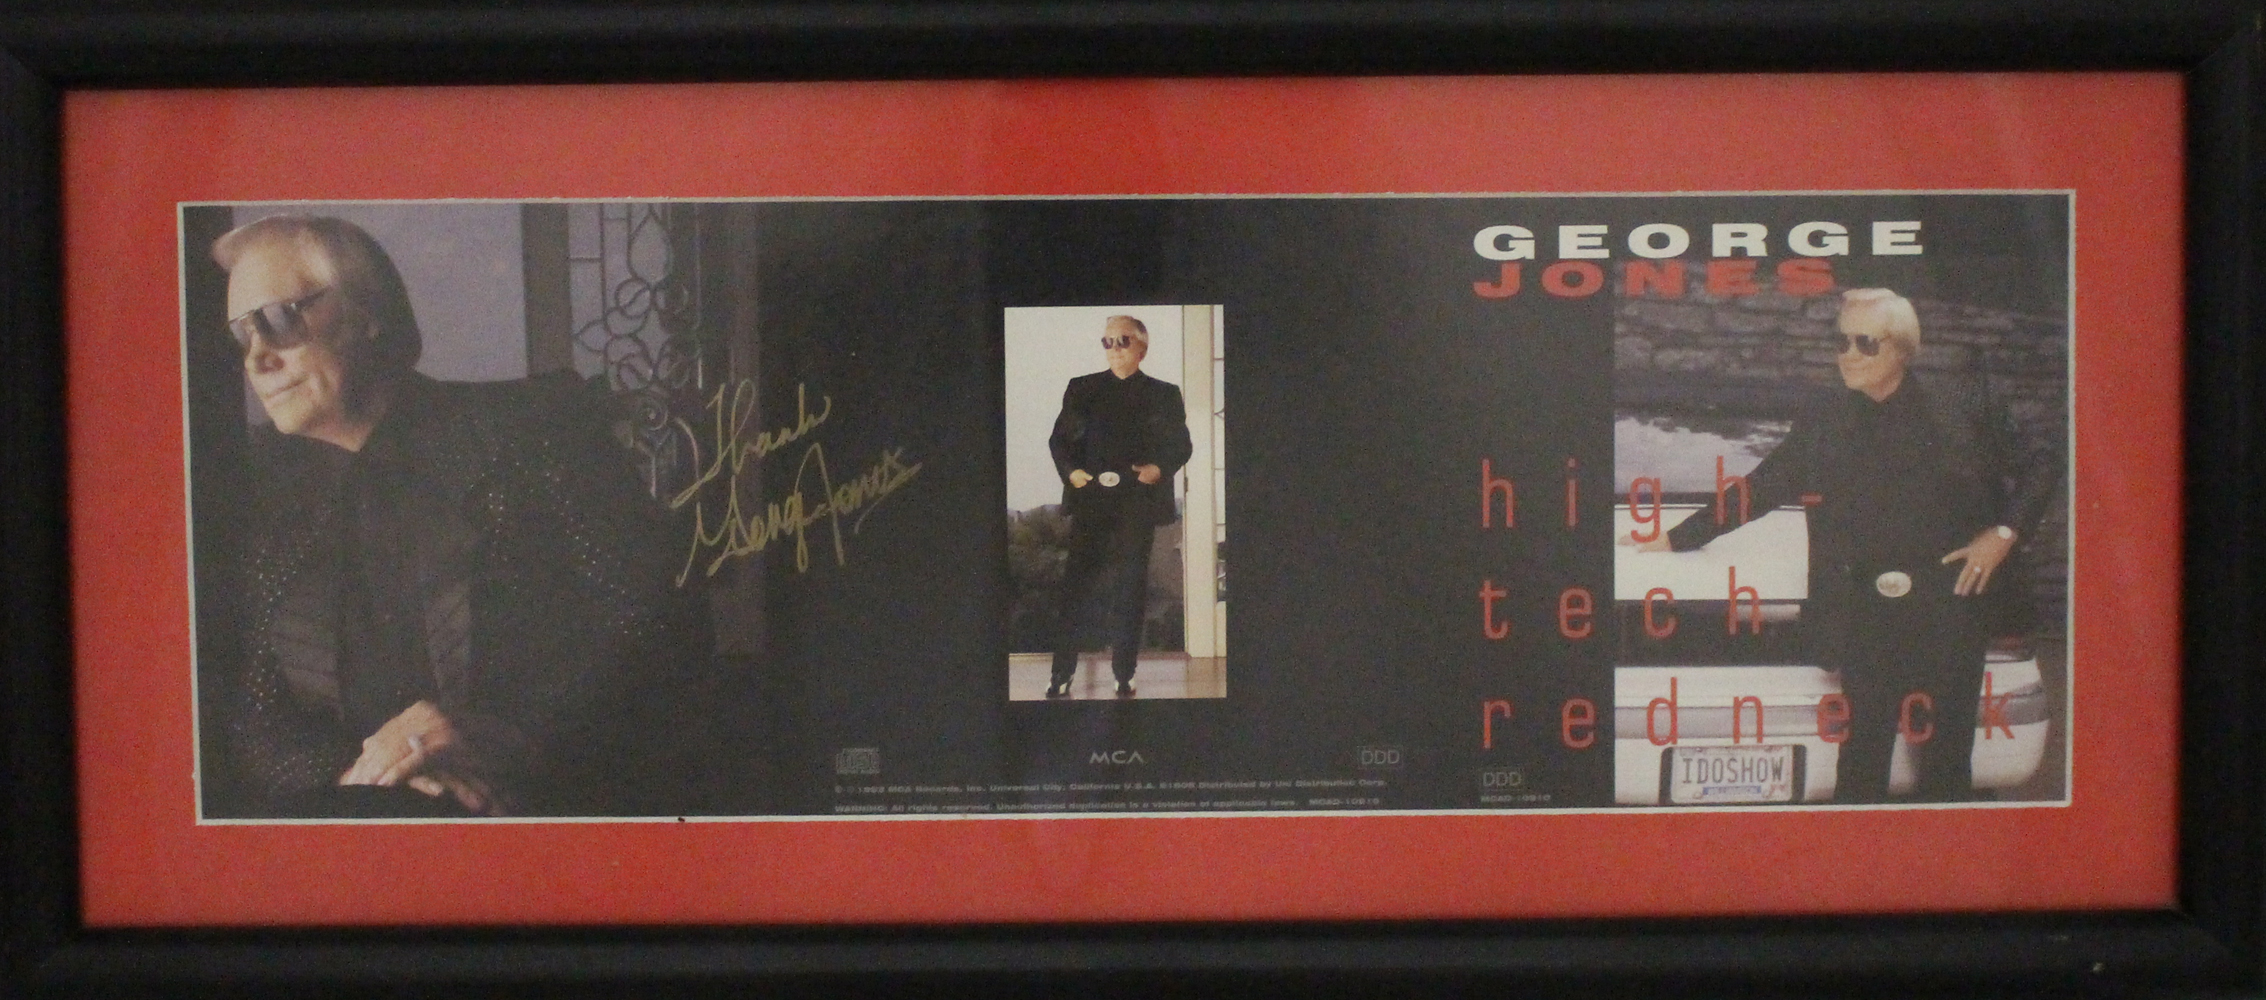 George Jones Autographed/Signed 14x6 Framed Photo Collage BAS 32170